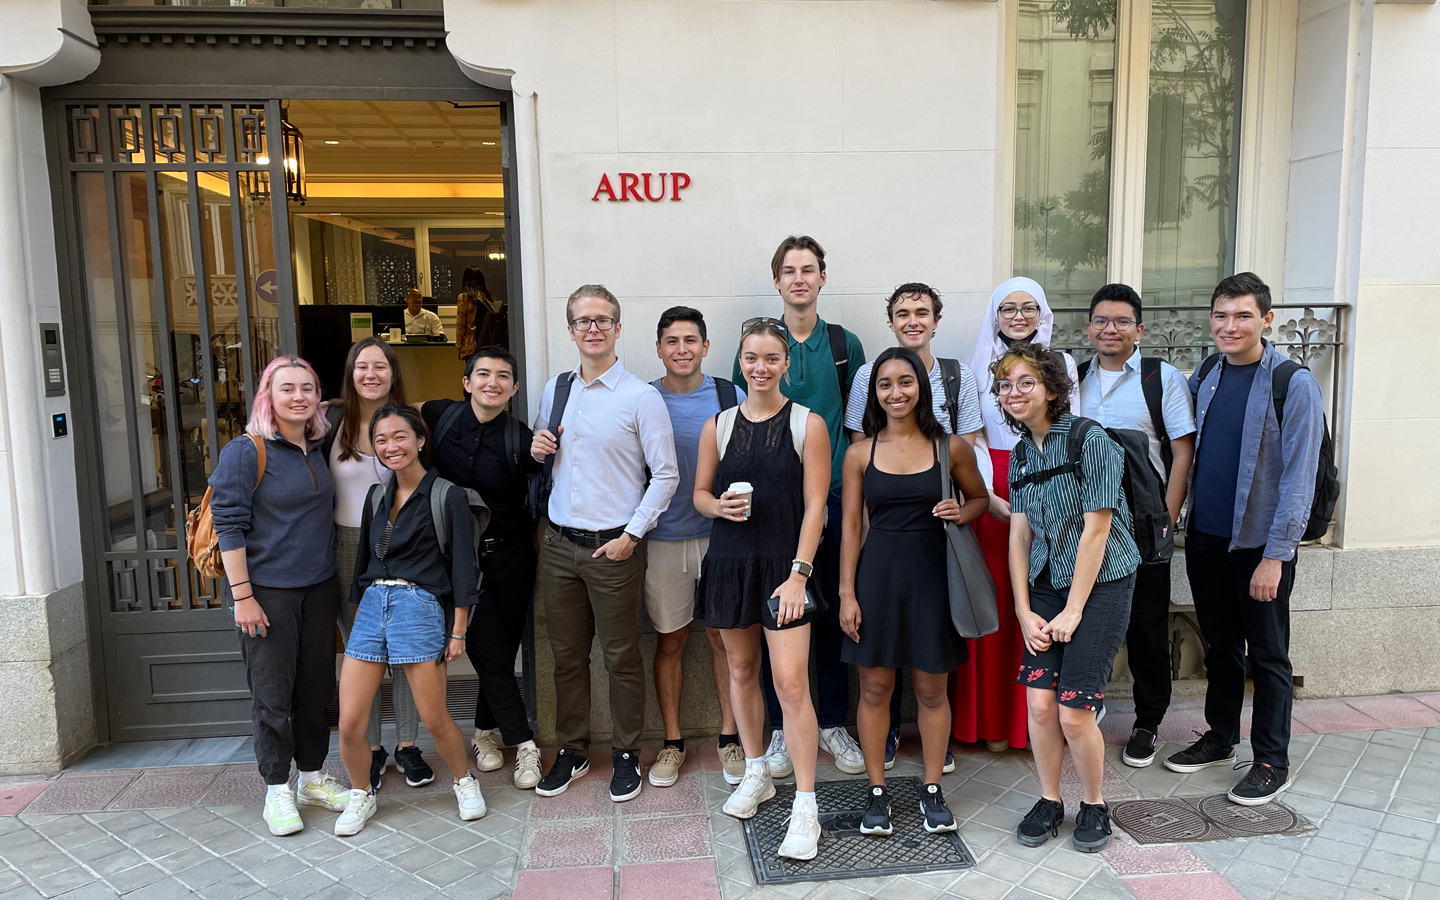 Group photo in front of ARUP firm